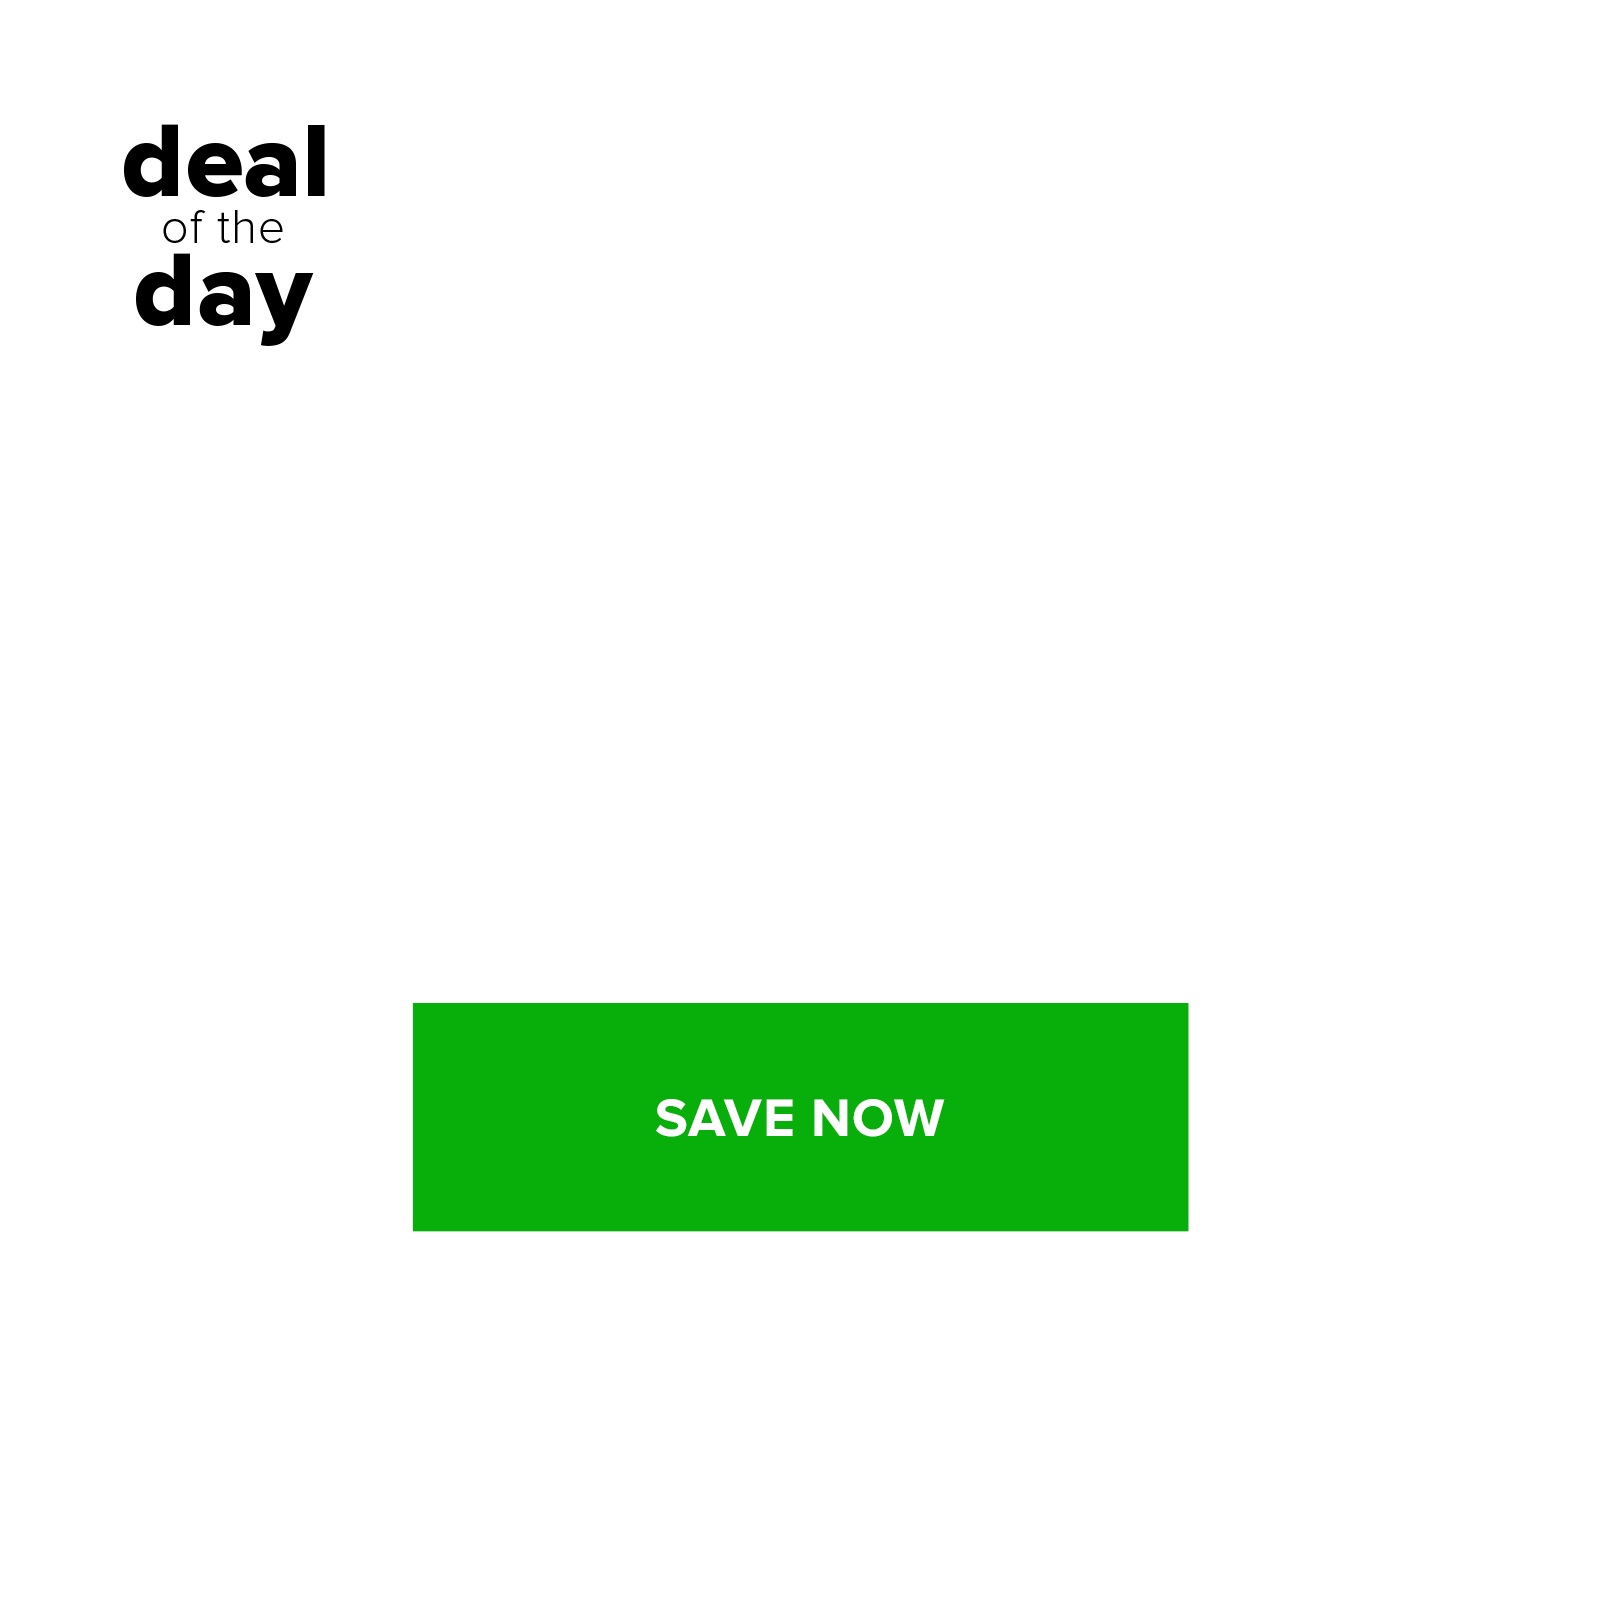 printed mats deal of the day